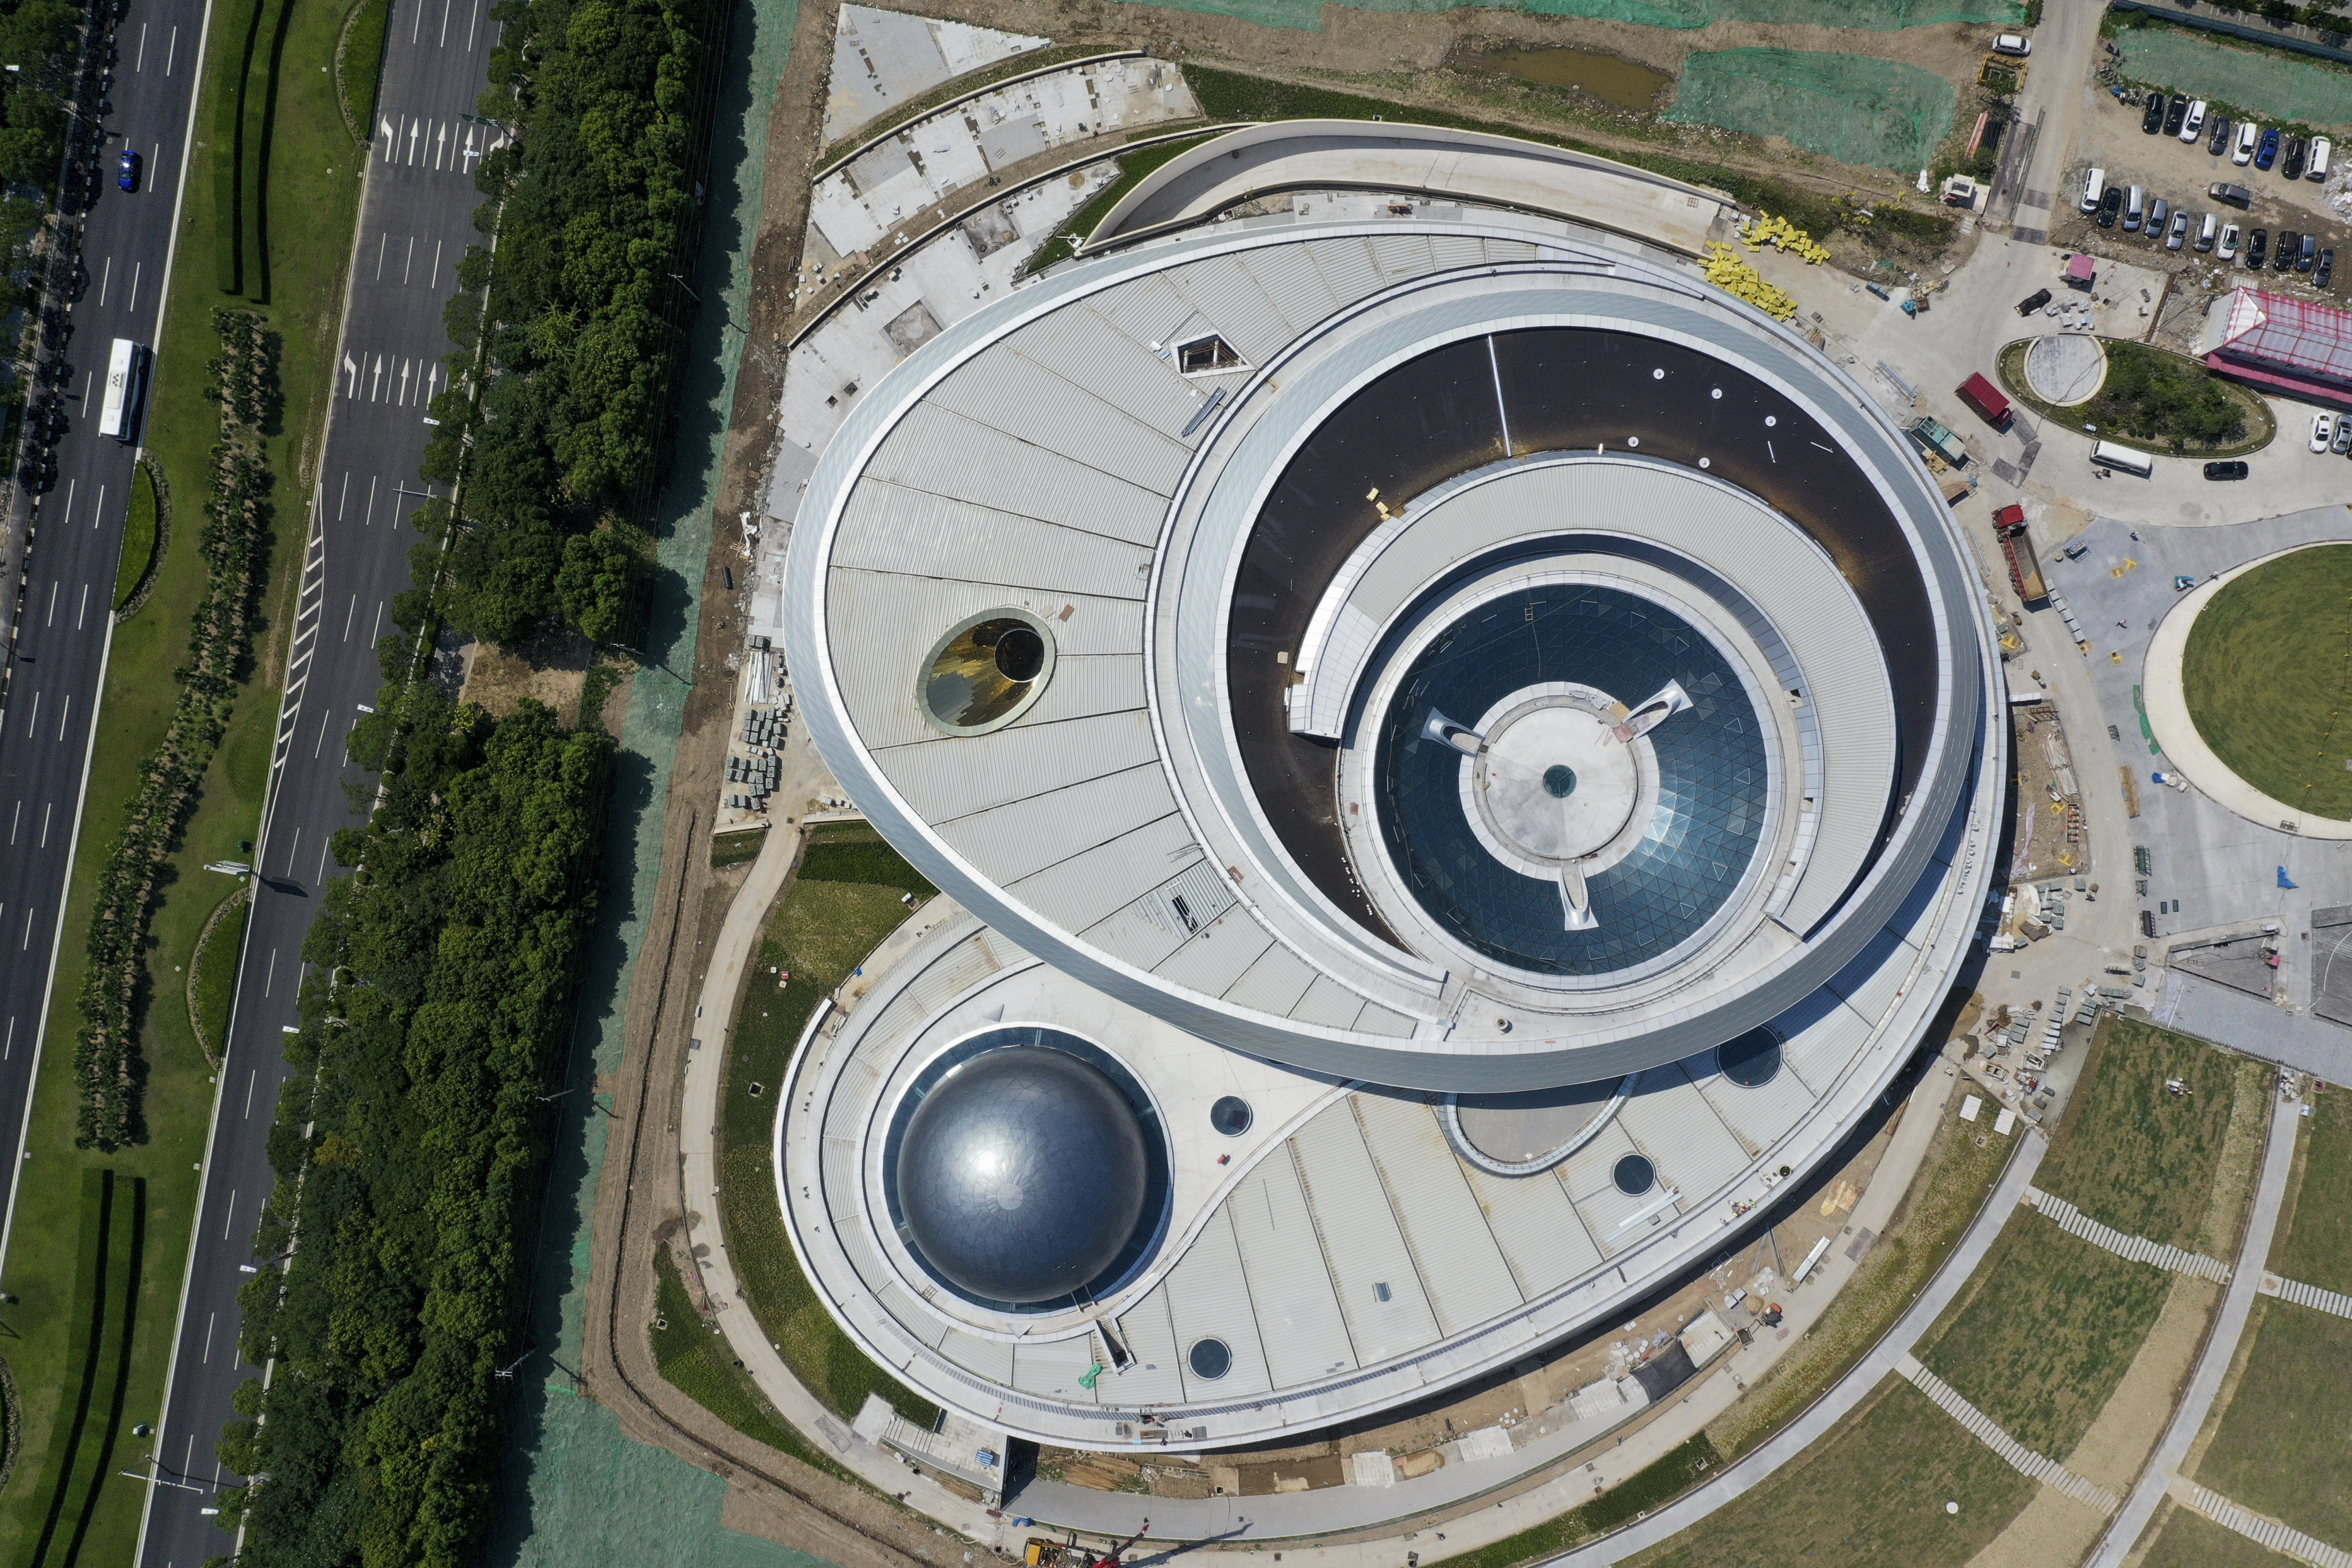 Aerial view of the newly built Shanghai Science and Technology Museum in Lingang area, Shanghai, China. China expanded its Shanghai free trade zone (FTZ) in its latest major strategic move for further opening-up. Photo: Imaginechina